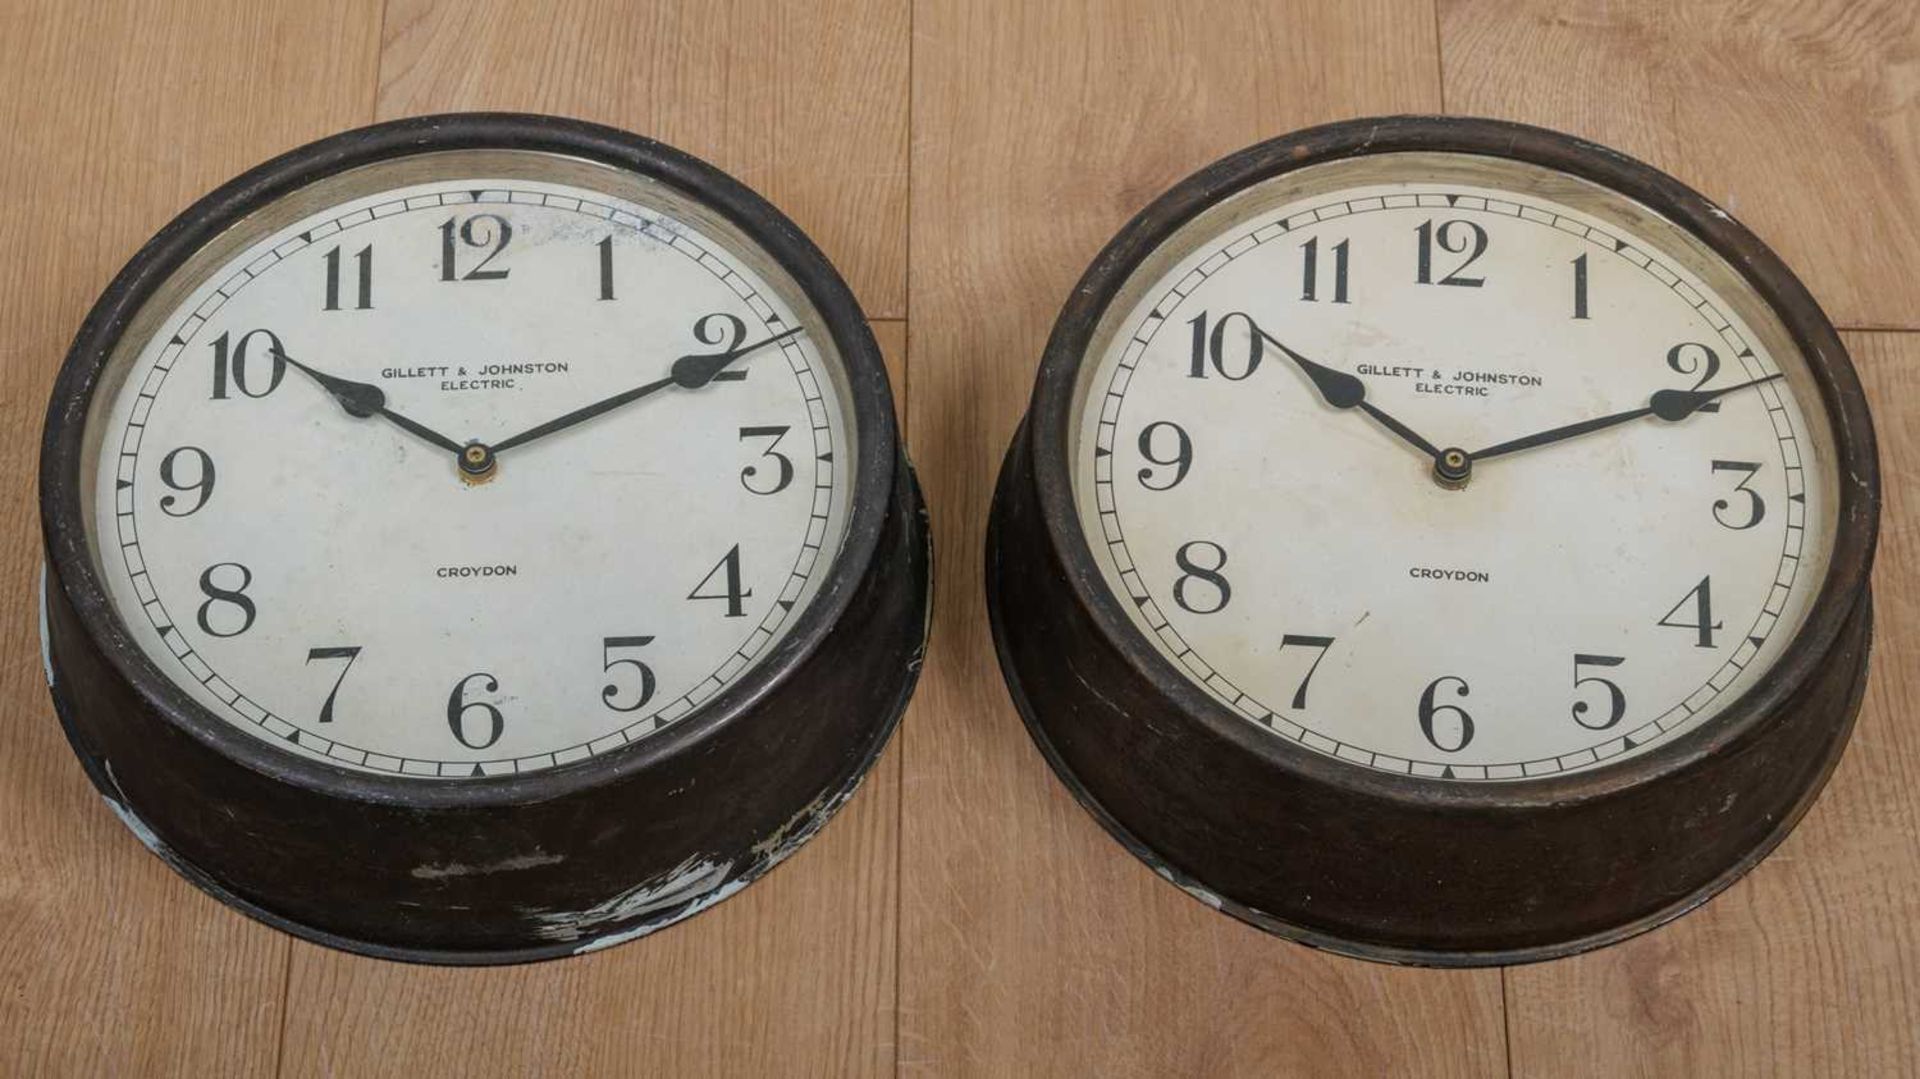 Two Gillett & Johnston electric wall clocks, the cases in bronzed tin with Arabic numerals to the - Image 2 of 3